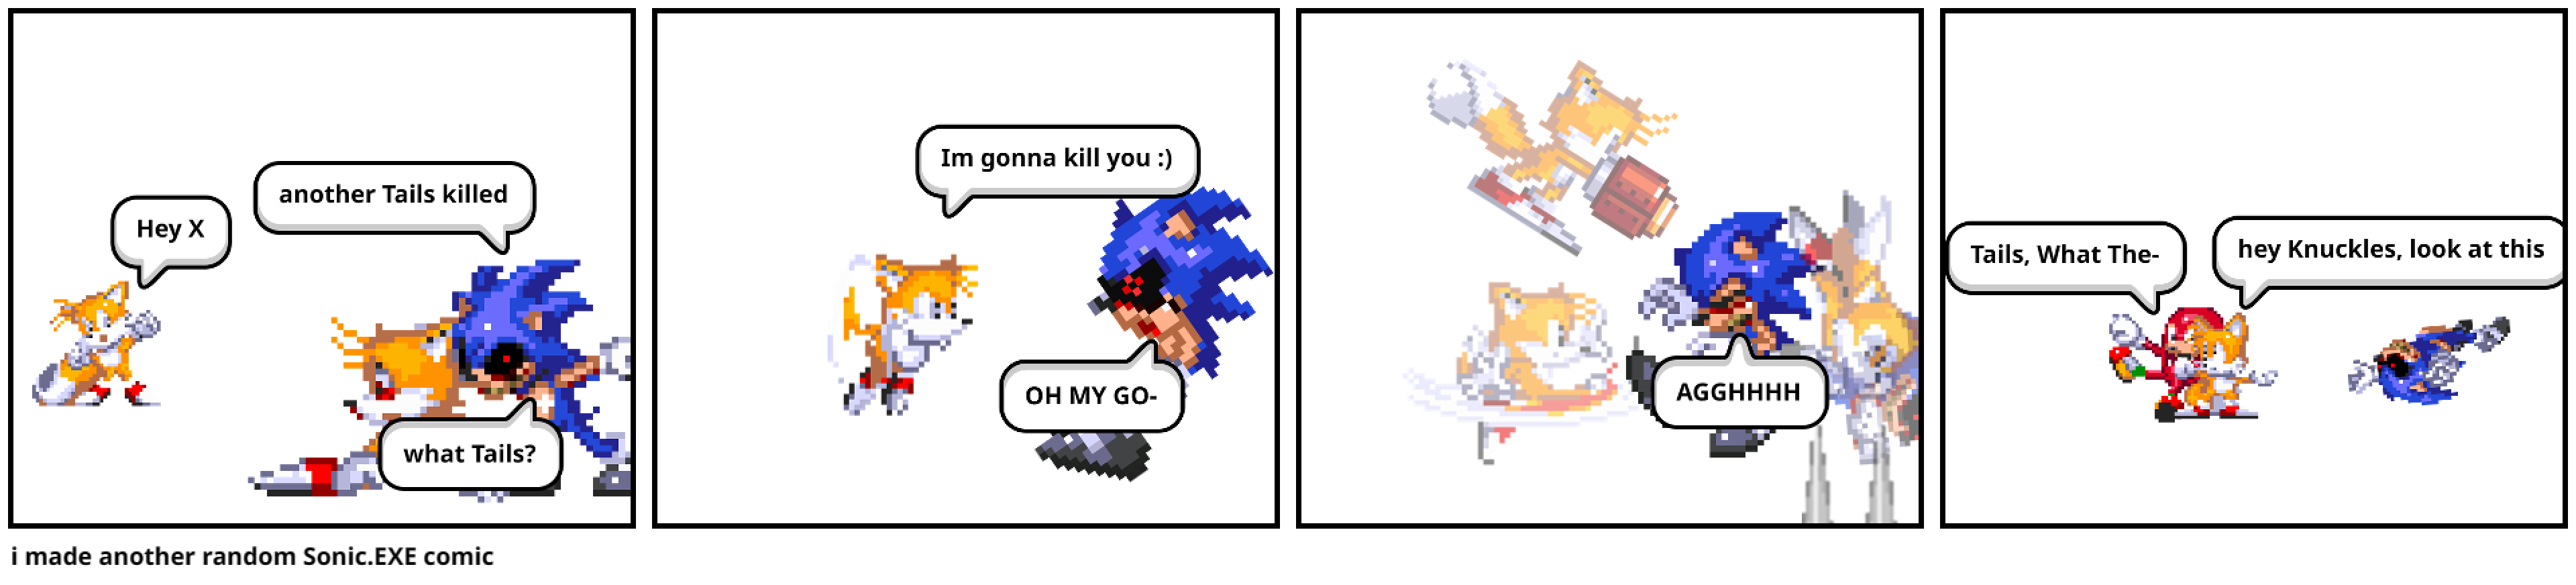 i made another random Sonic.EXE comic